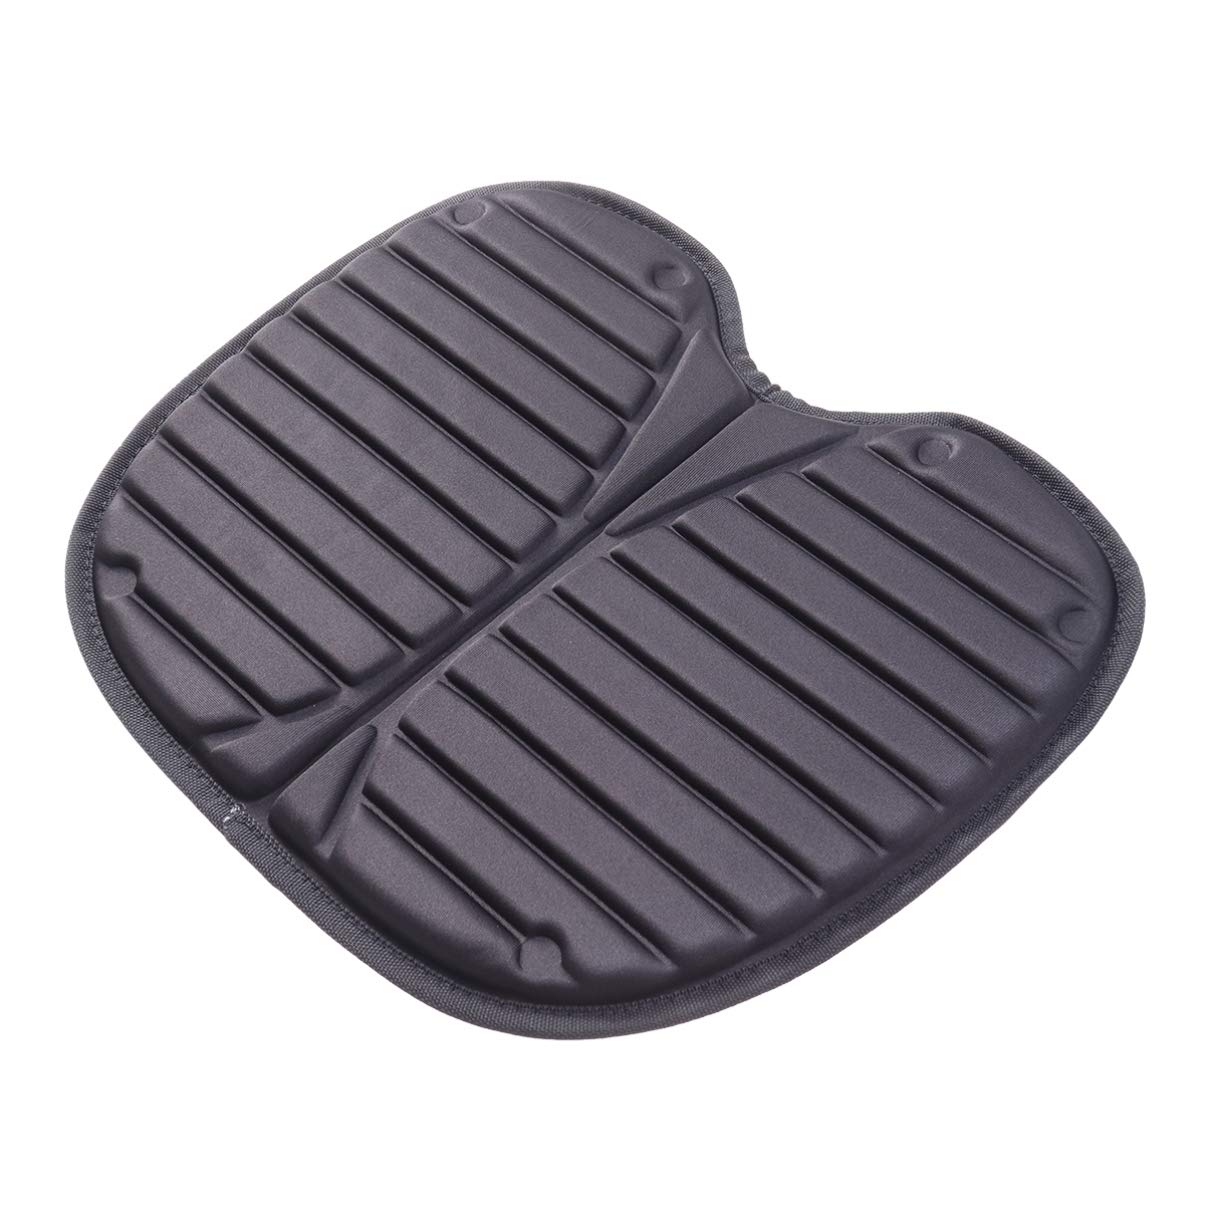 BESPORTBLE Kayak Seat Cushion: Comfortable Canoe Seat Kayak Seat Pad Kayak  Padded Seat Cushion Kayak Accessories for Fishing Boat (Black) 37x32.5x1cm